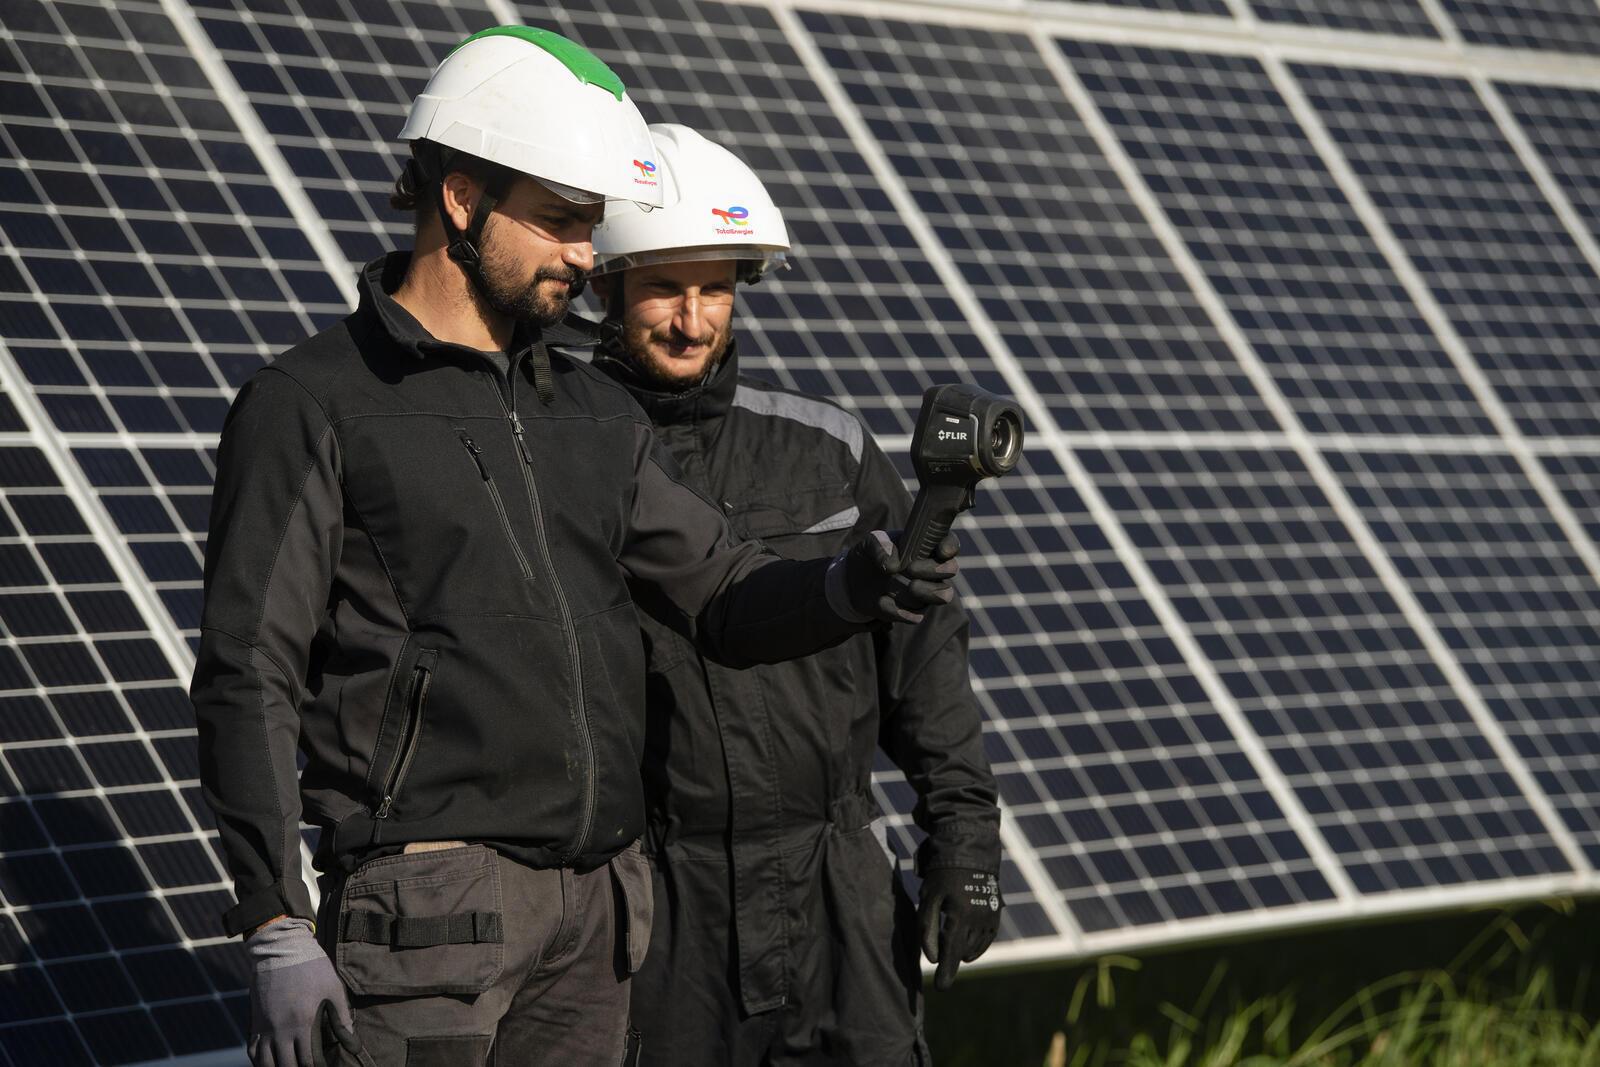 Employees at a solar power plant